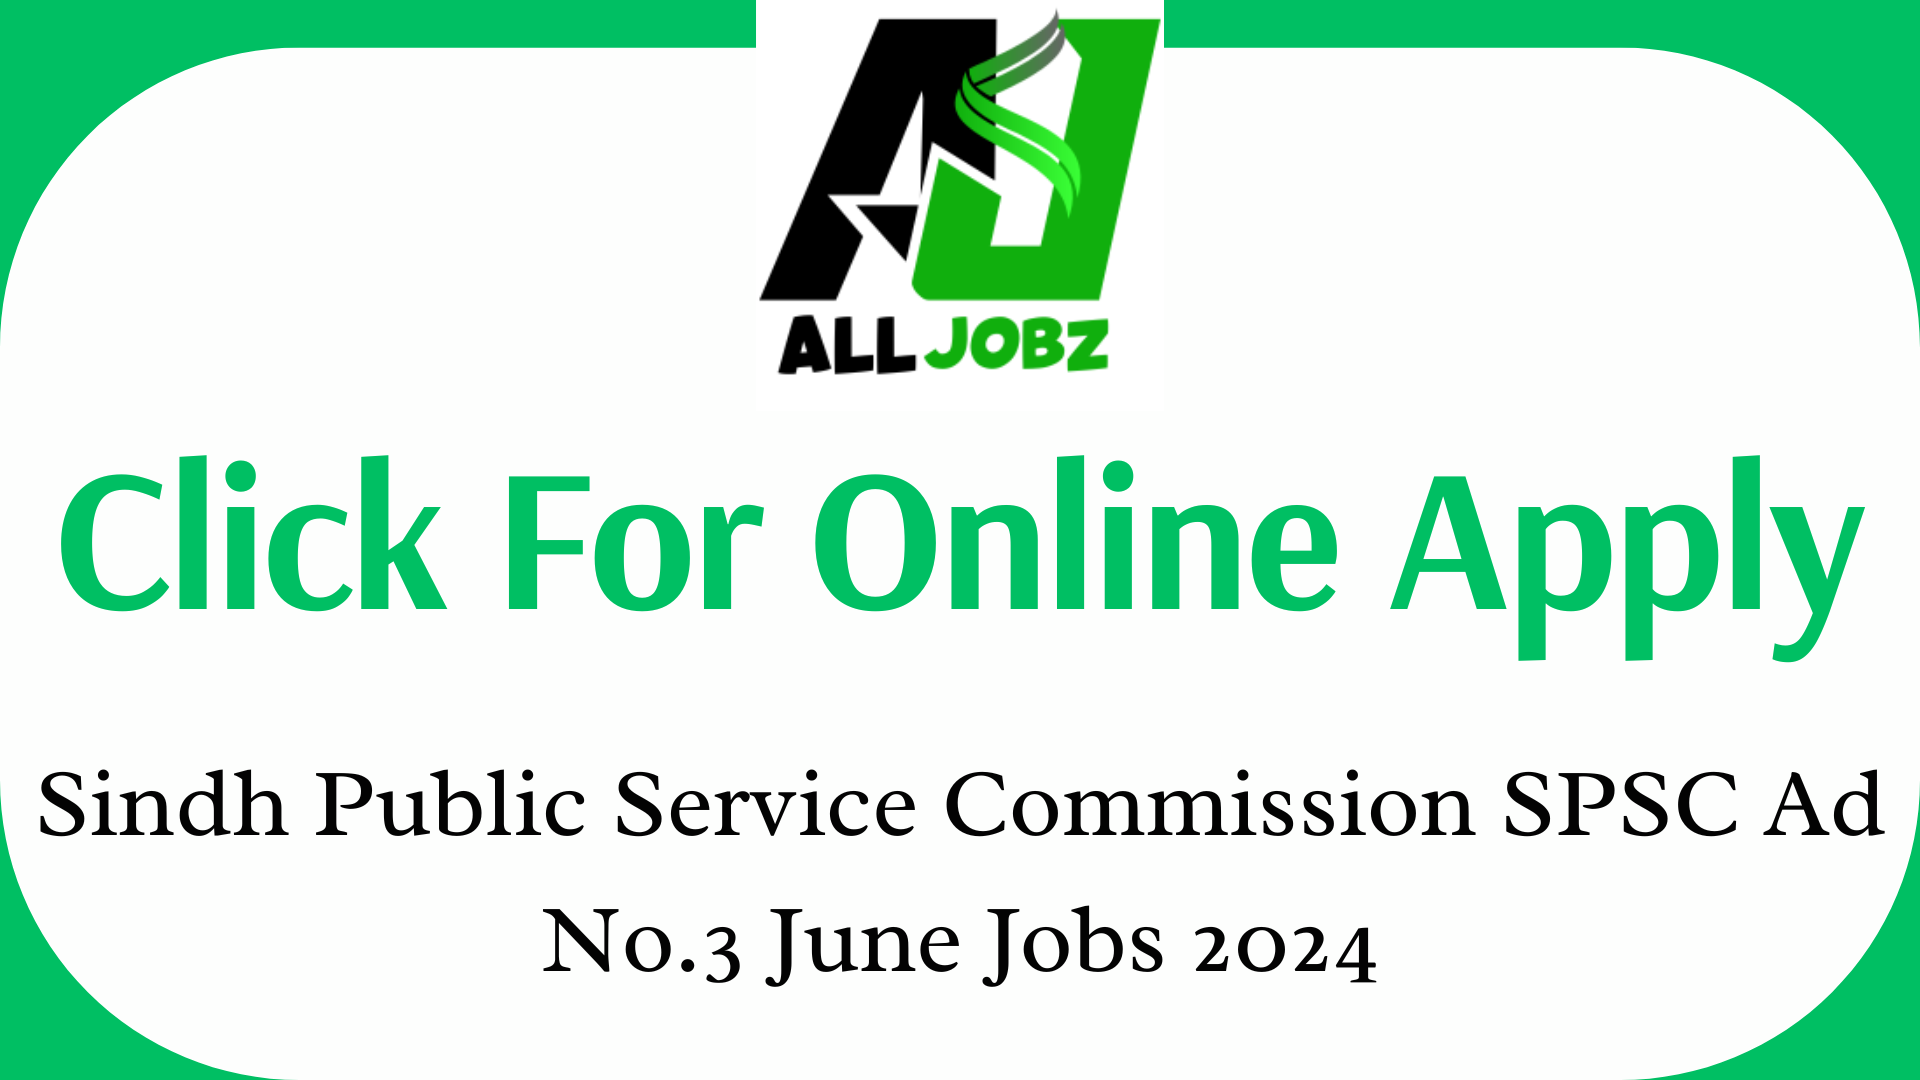 Sindh Public Service Commission Spsc June Jobs 2024 For Instructors And Educational Advisors, School Supervisors, Financial Analysts And Audit Officers, Medical Officers And Consultants, Agricultural Scientists And Extension Workers, Spsc Login, Spsc Jobs Advertisement, Spsc Candidate Portal, Sindh Public Service Commission Jobs 2024, Spsc Slip, Www.spsc.gov.pk Apply Online, Spsc Slip Download, Spsc Portal, Spsc Login Sst,